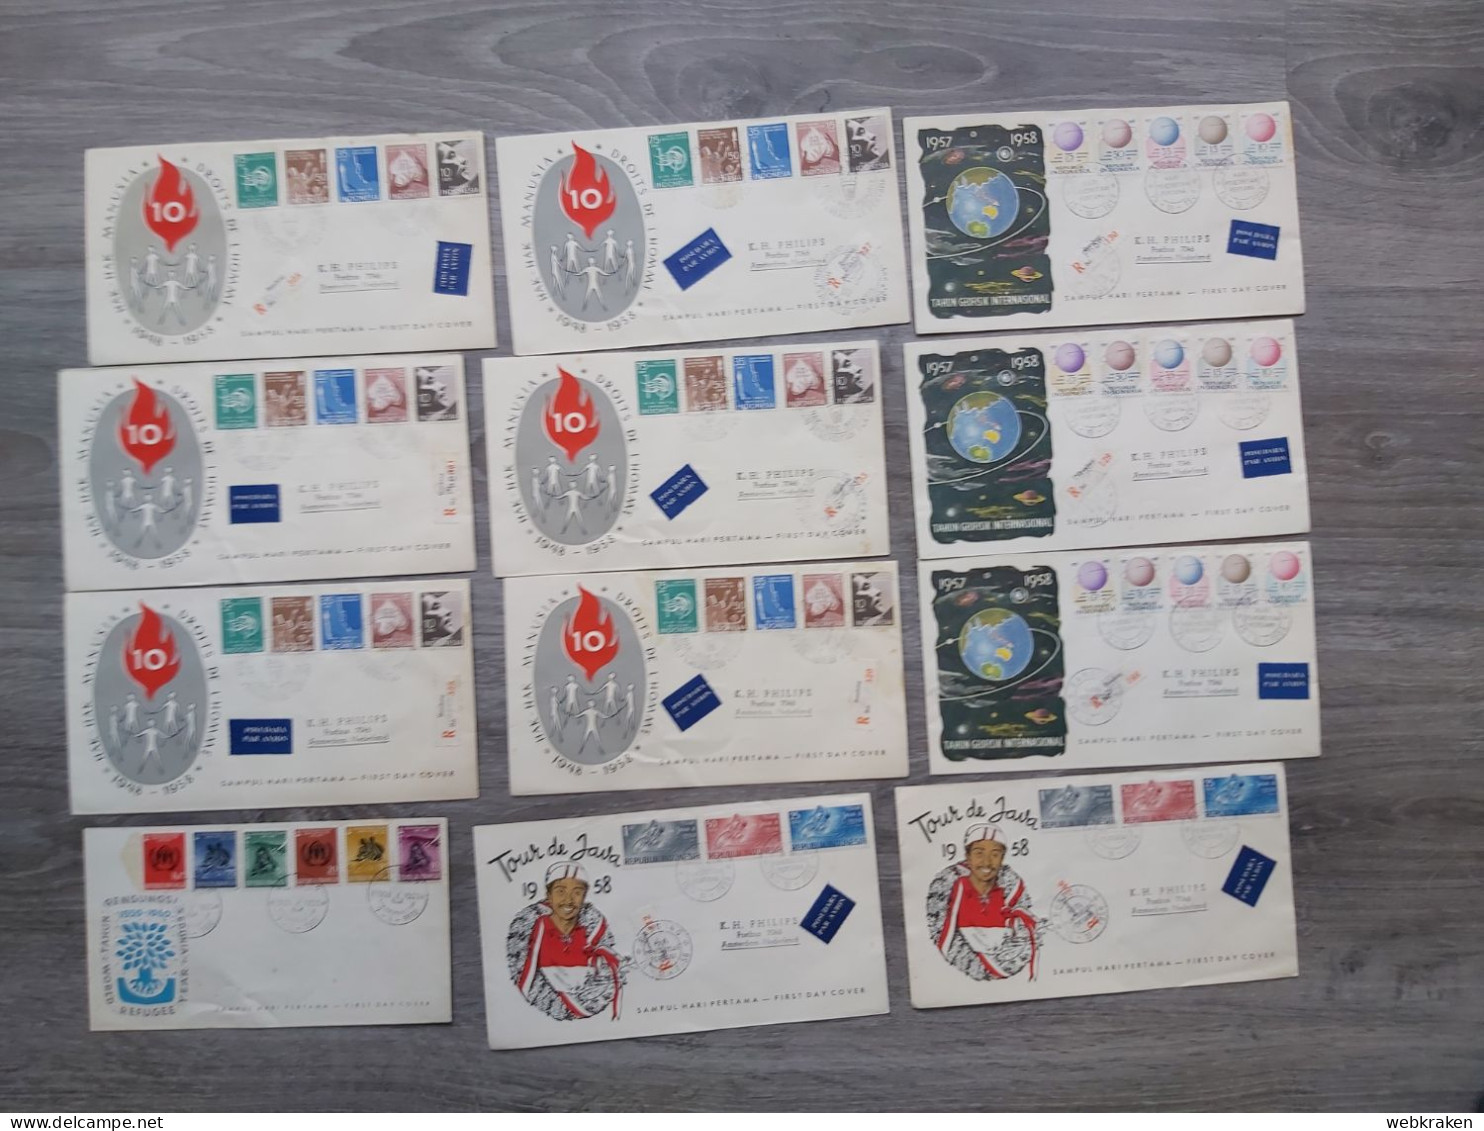 F.D.C. FDC FIRST DAY COVER LOT INDONESIA JAVA BANDUNG FOR STUDY - Indonesien